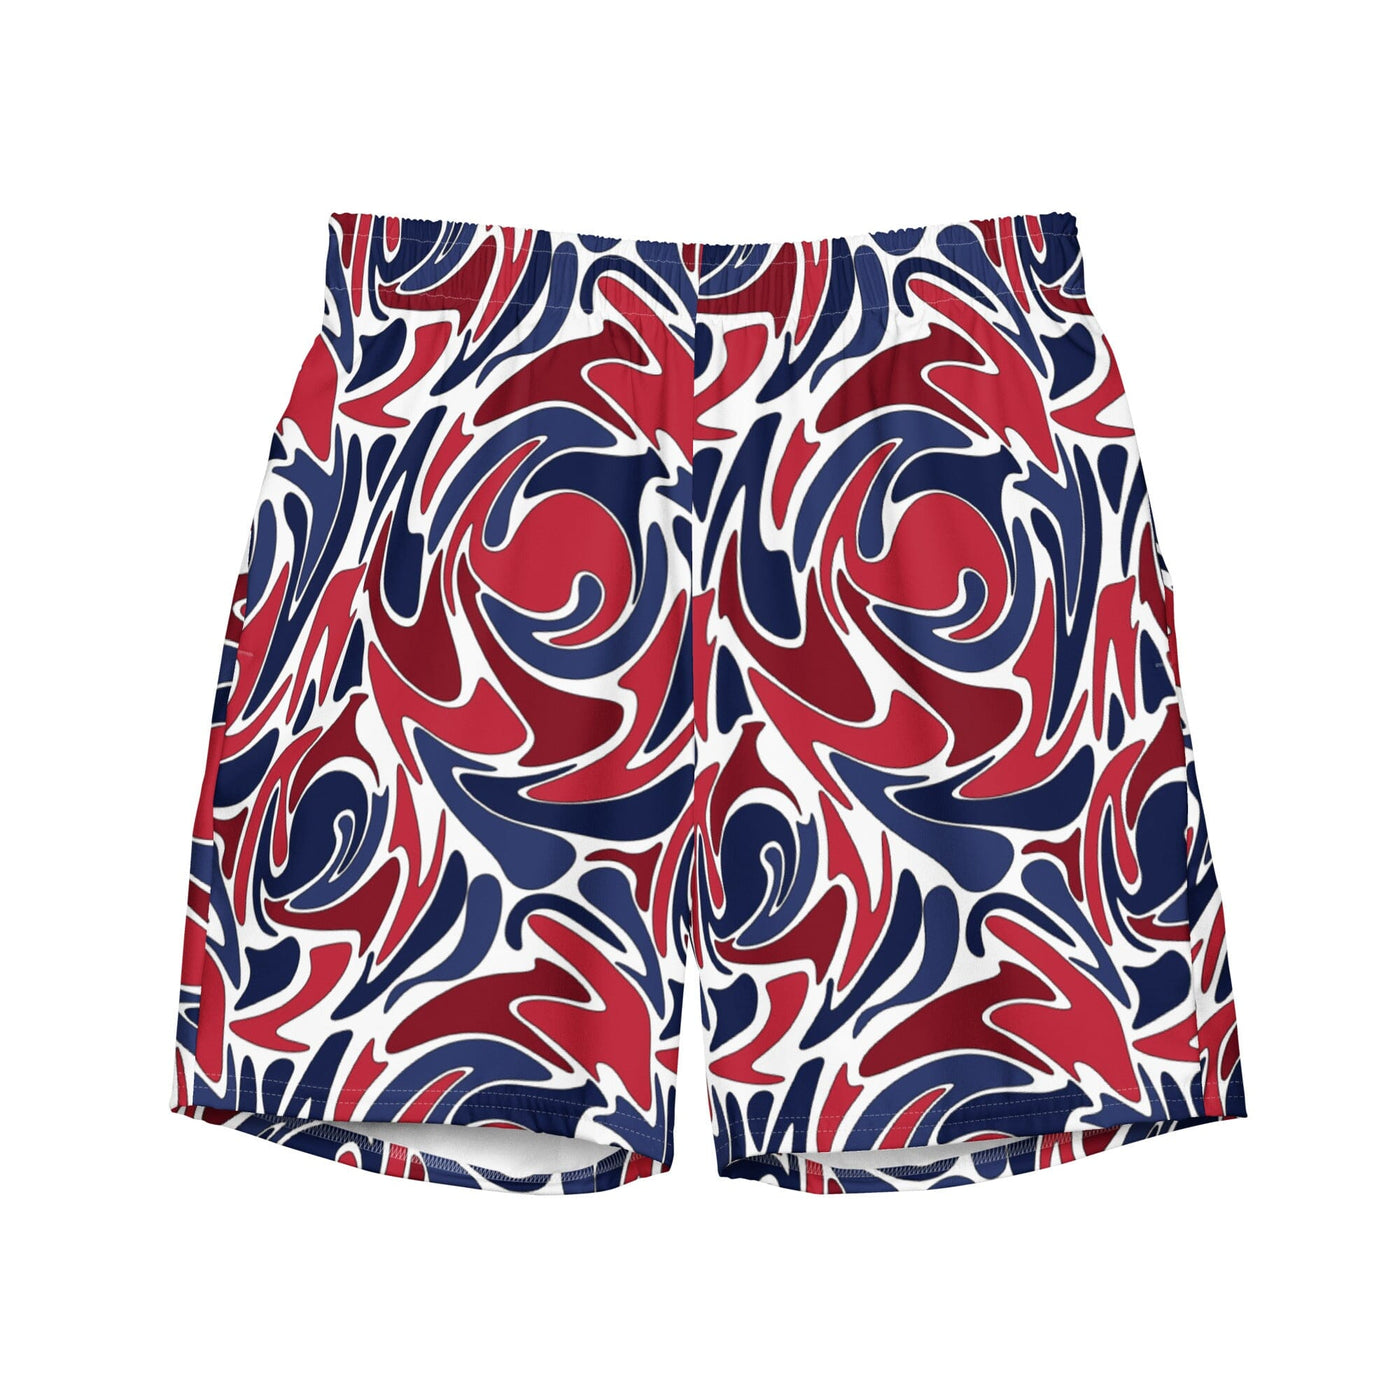 Psychedelic Patriotic Swim Trunks Psychedelic July 4 Table Decor Chefanie 